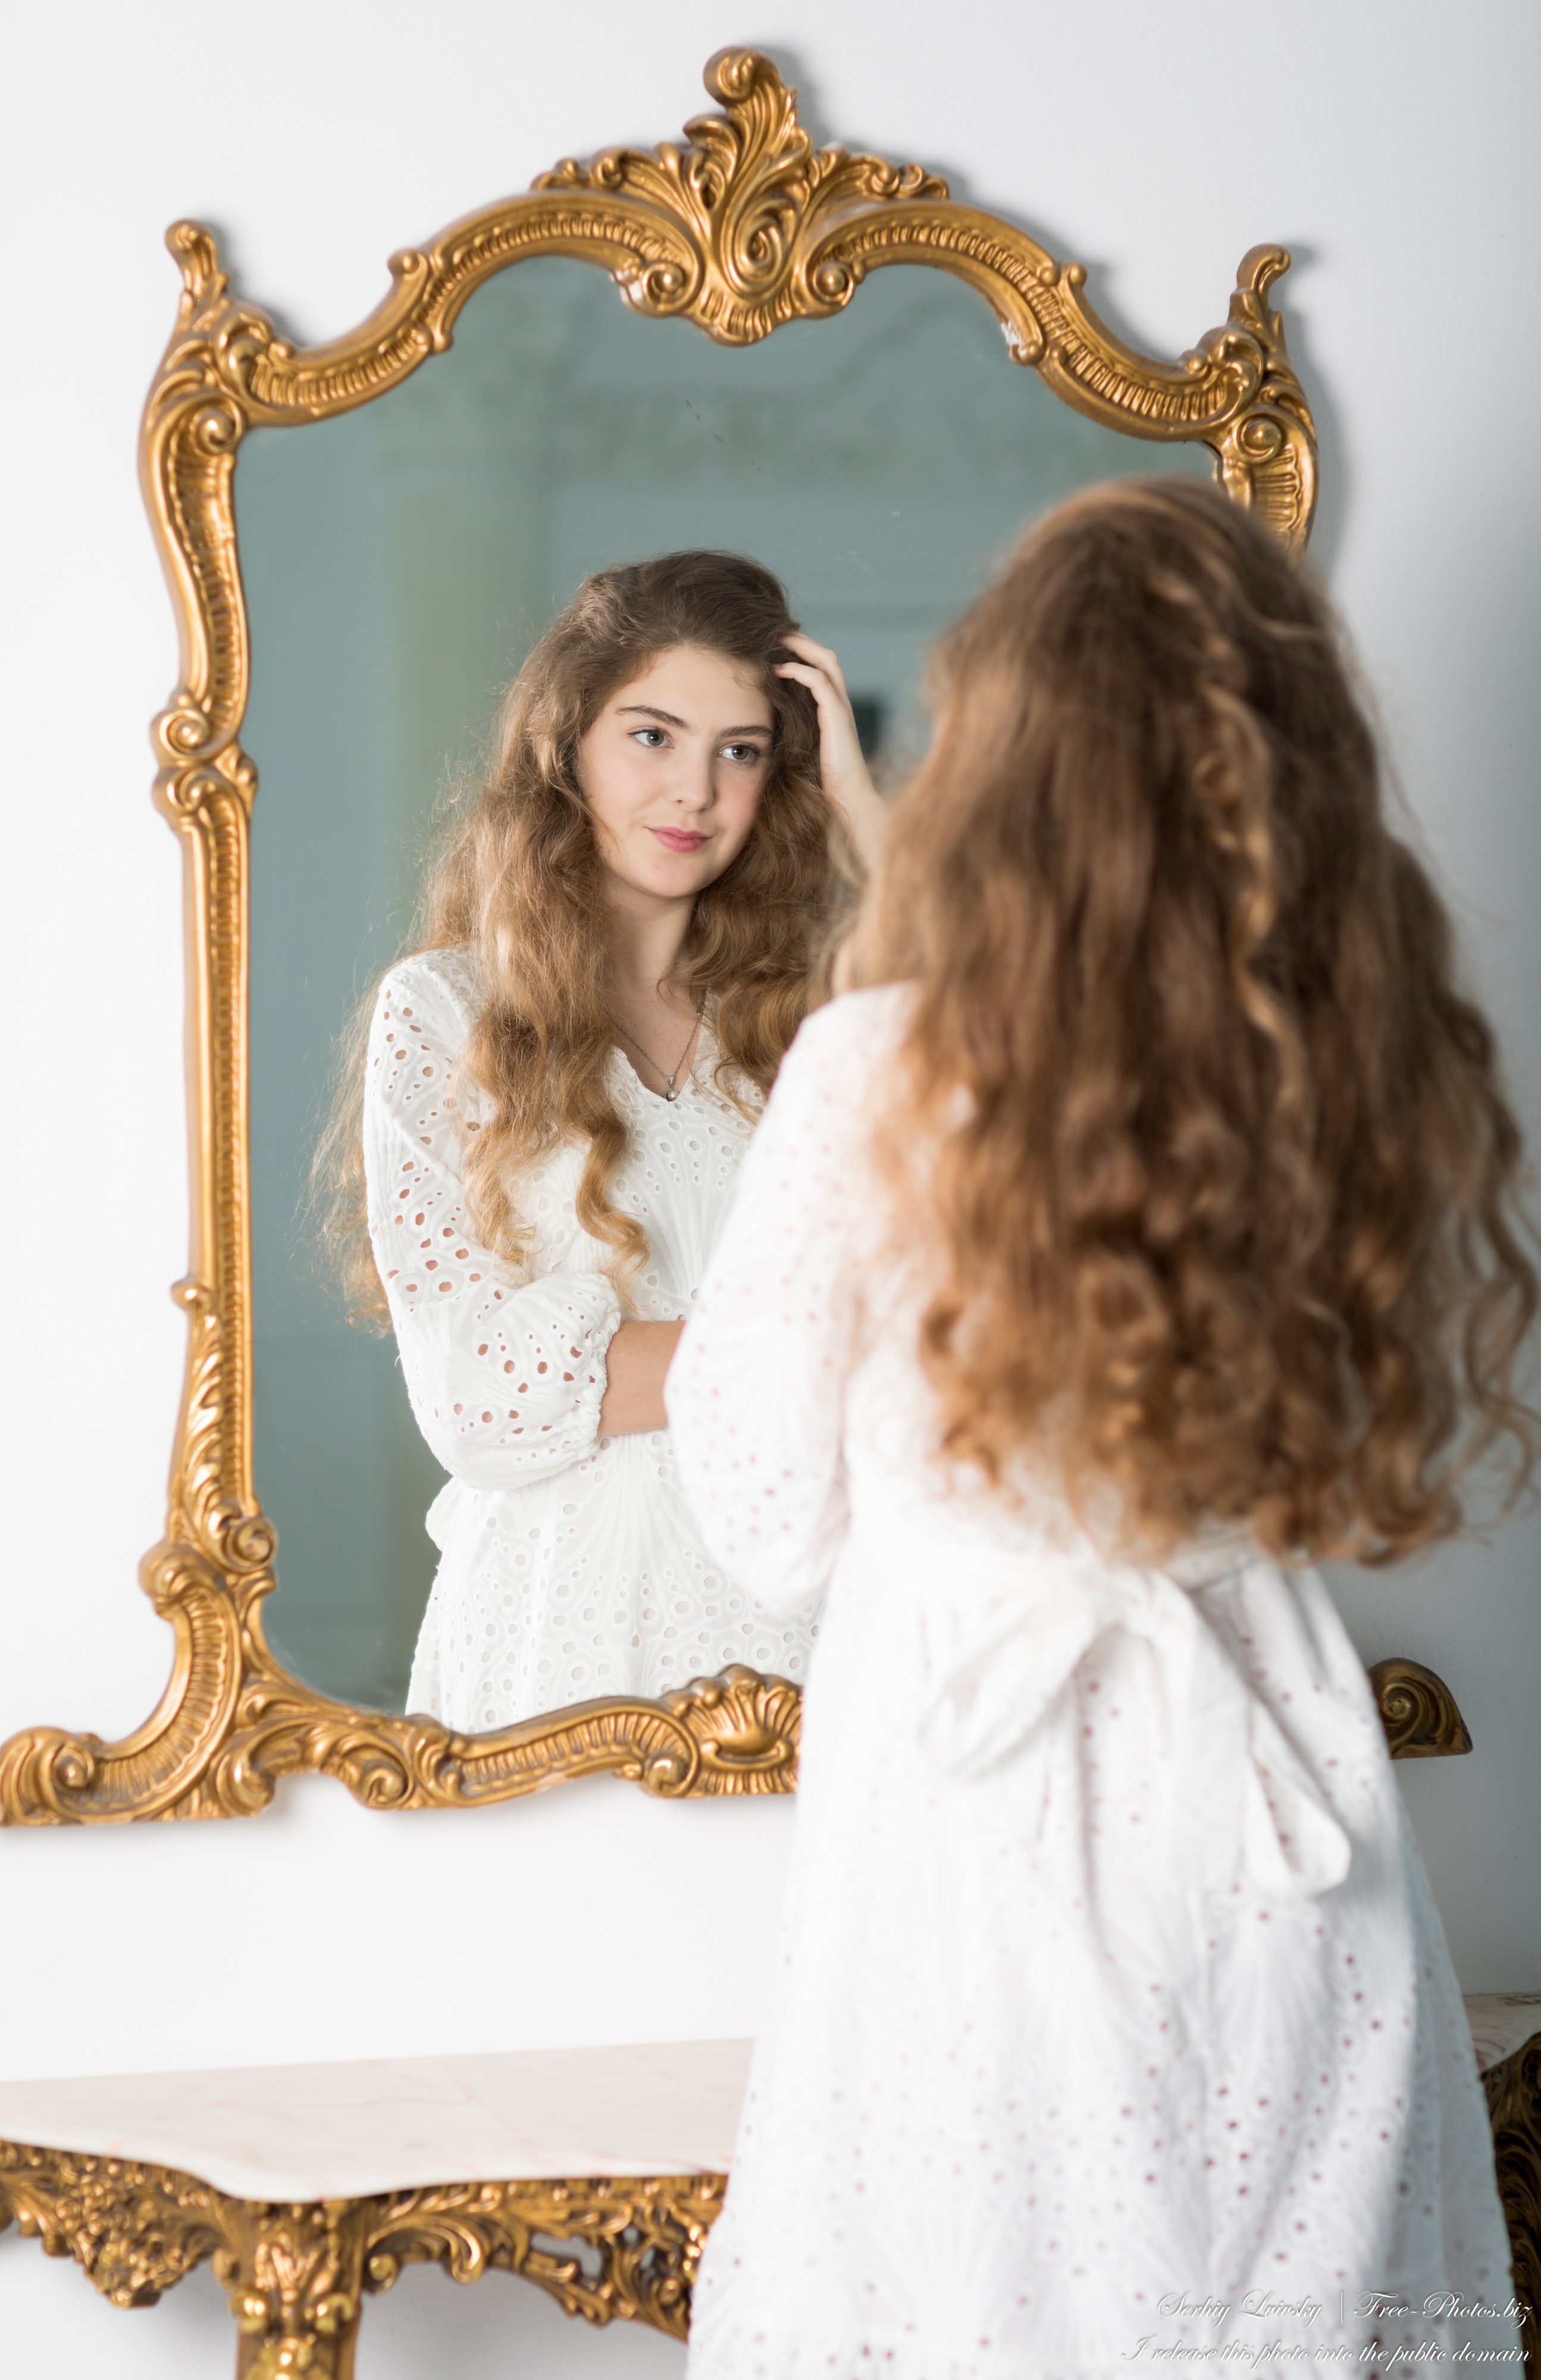 Kornelia - a 15-year-old girl with natural curly hair photographed in April 2023 by Serhiy Lvivsky, picture 19